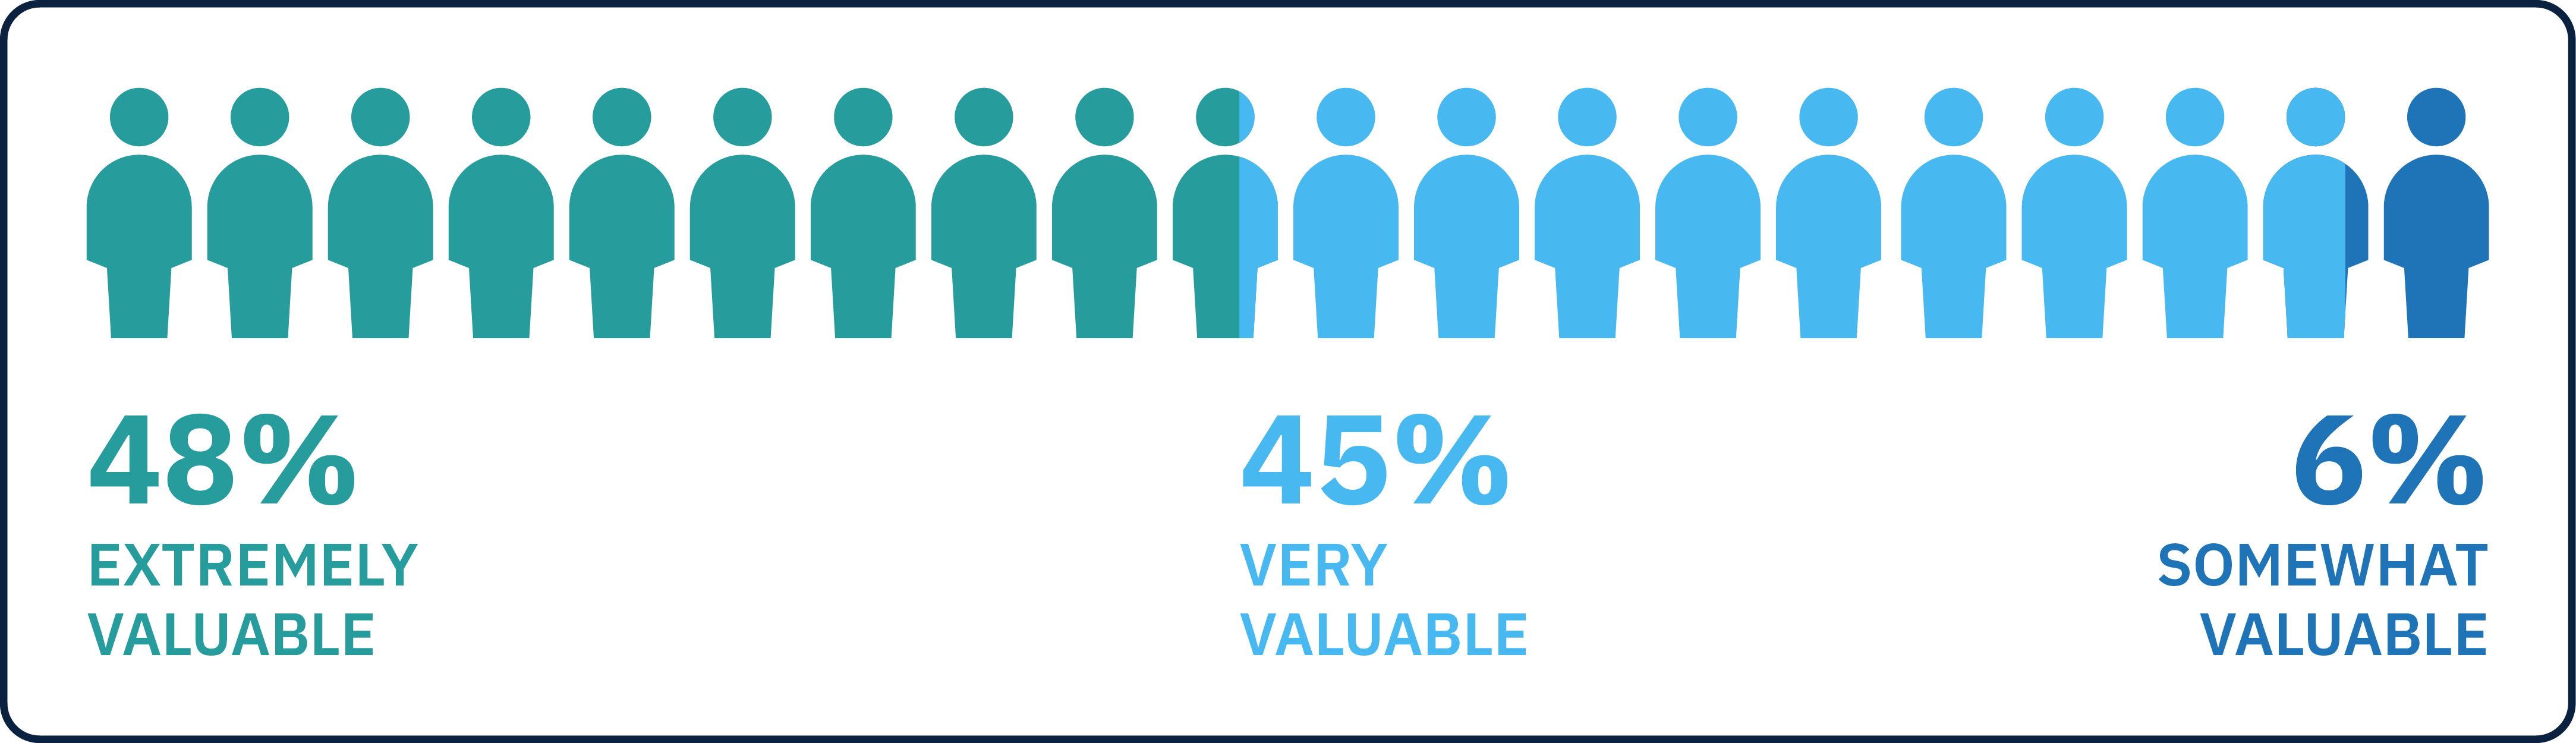 Chart showing 48% extremely valuable, 45% very valuable and 6% somewhat valuable